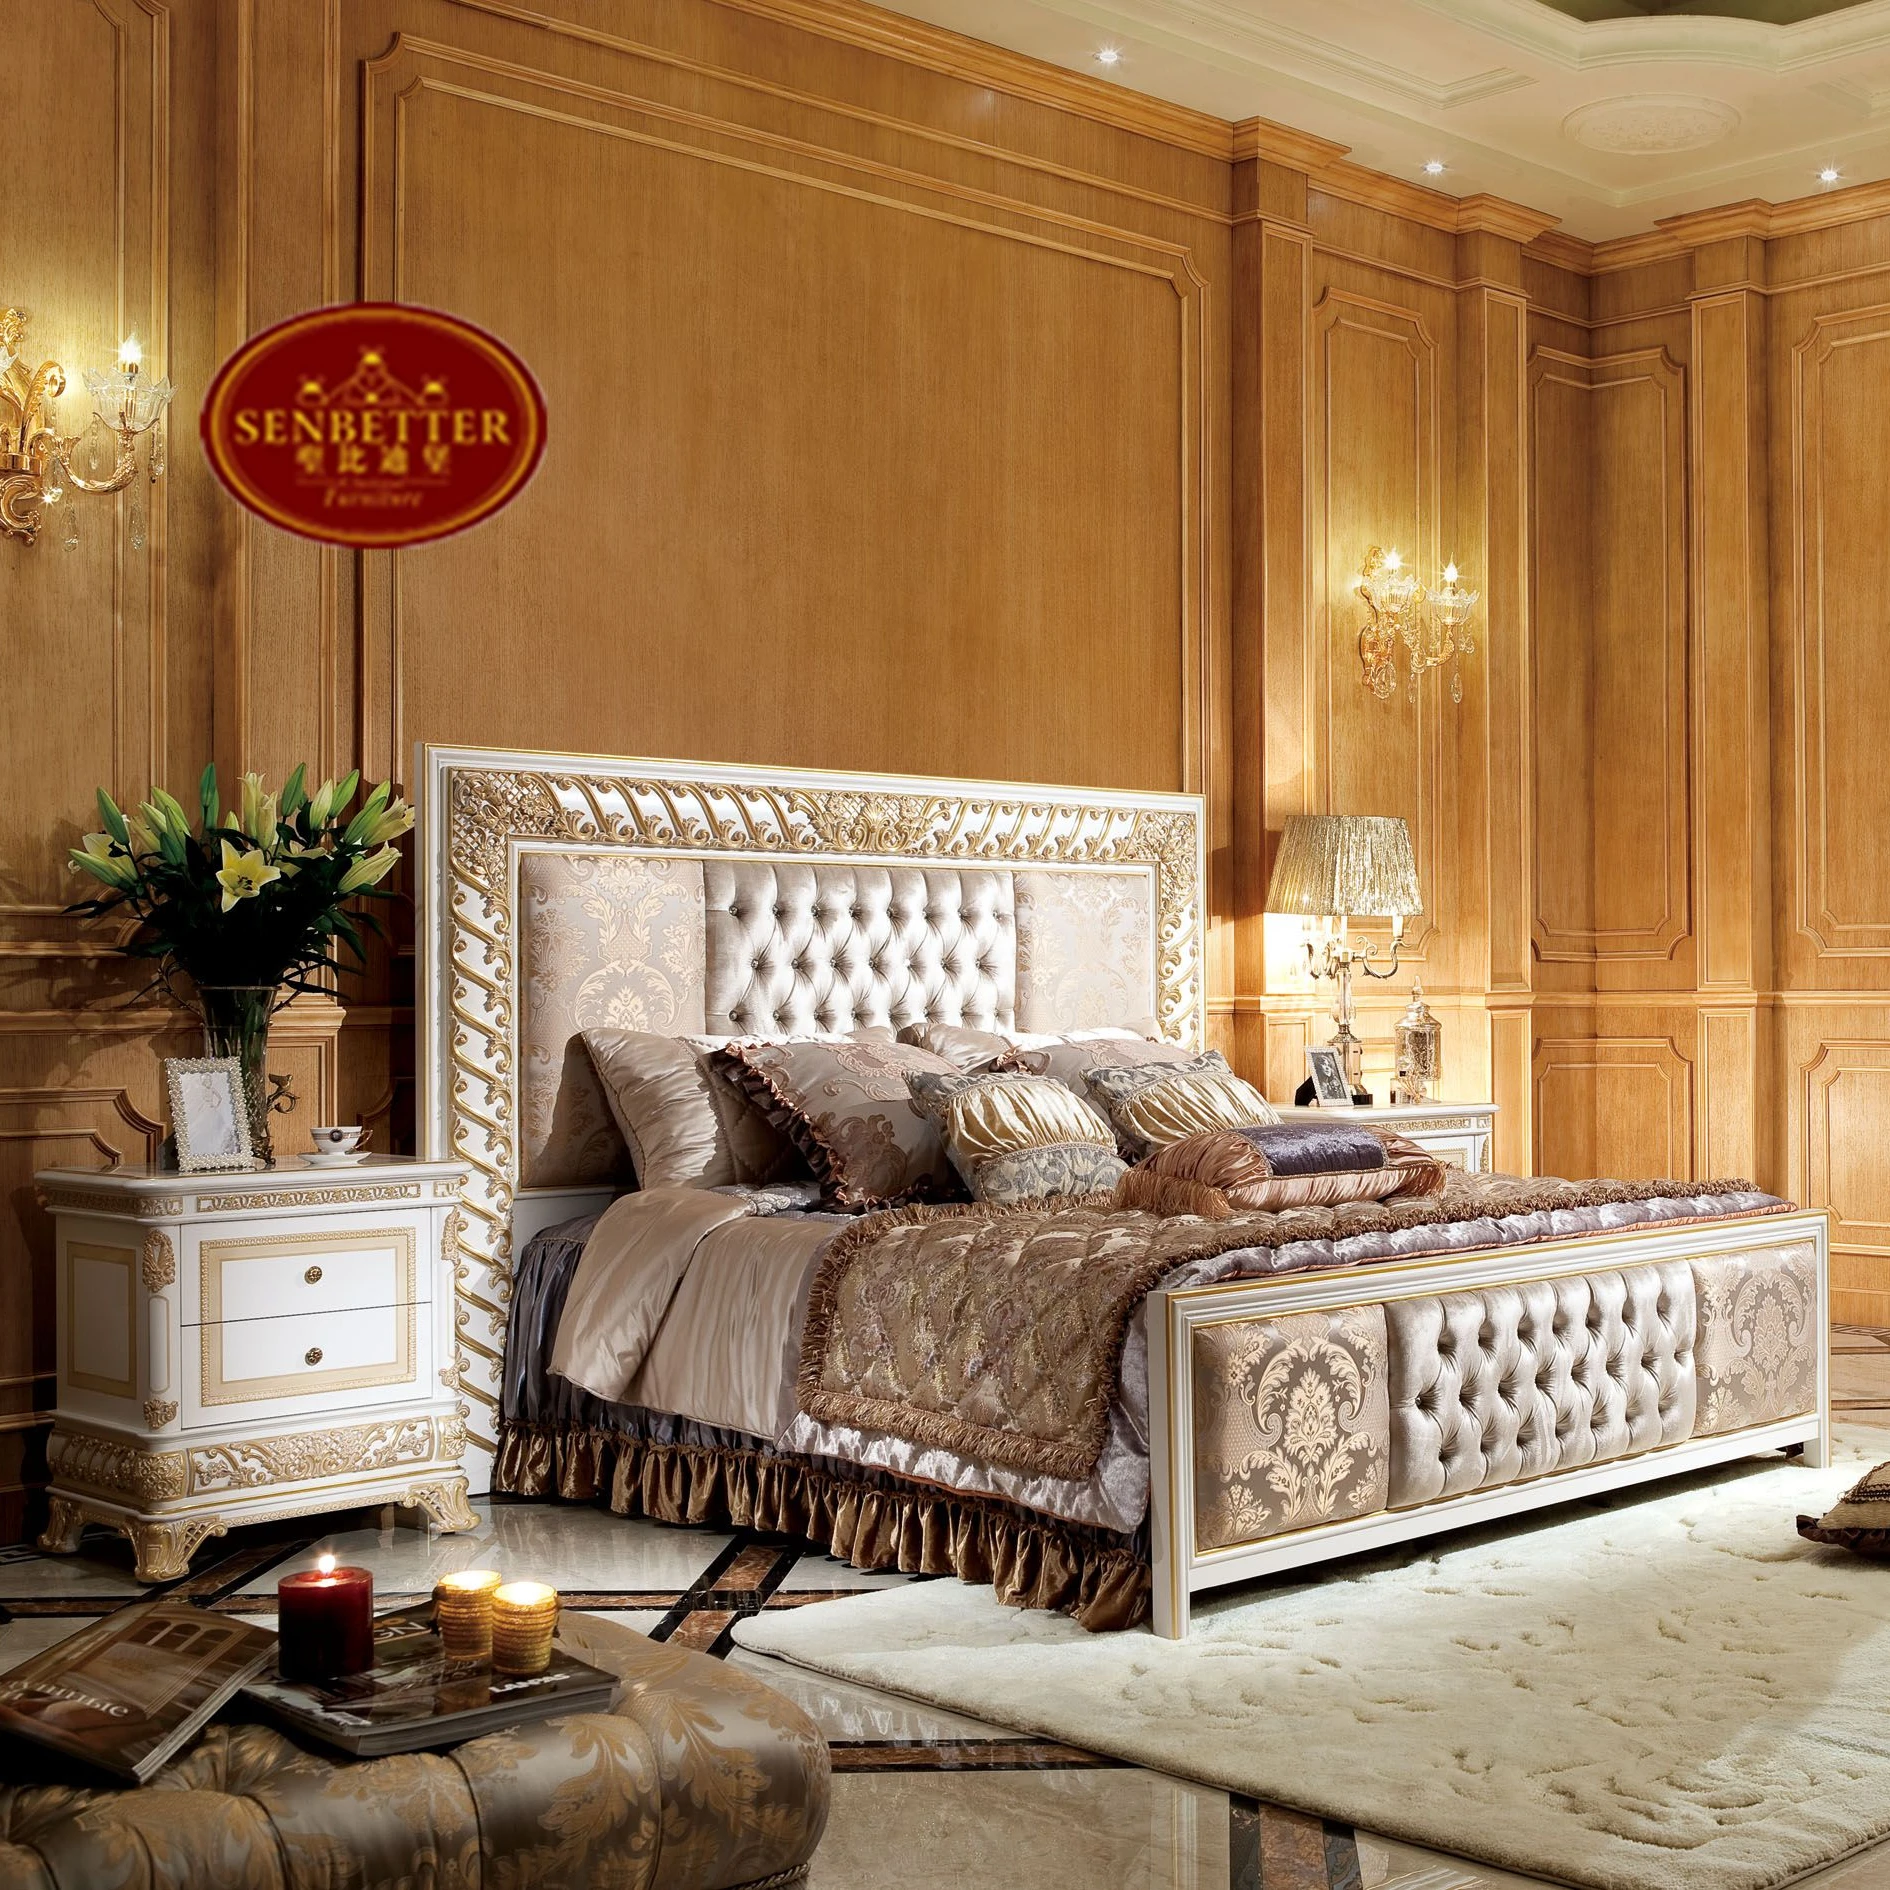 0062w 2 White Gold Decor Bedroom Sets Furniture Luxury Wooden King Size Bed Buy Bed Decor Bedroom Sets Luxury King Size Wooden Bed Product On Alibaba Com